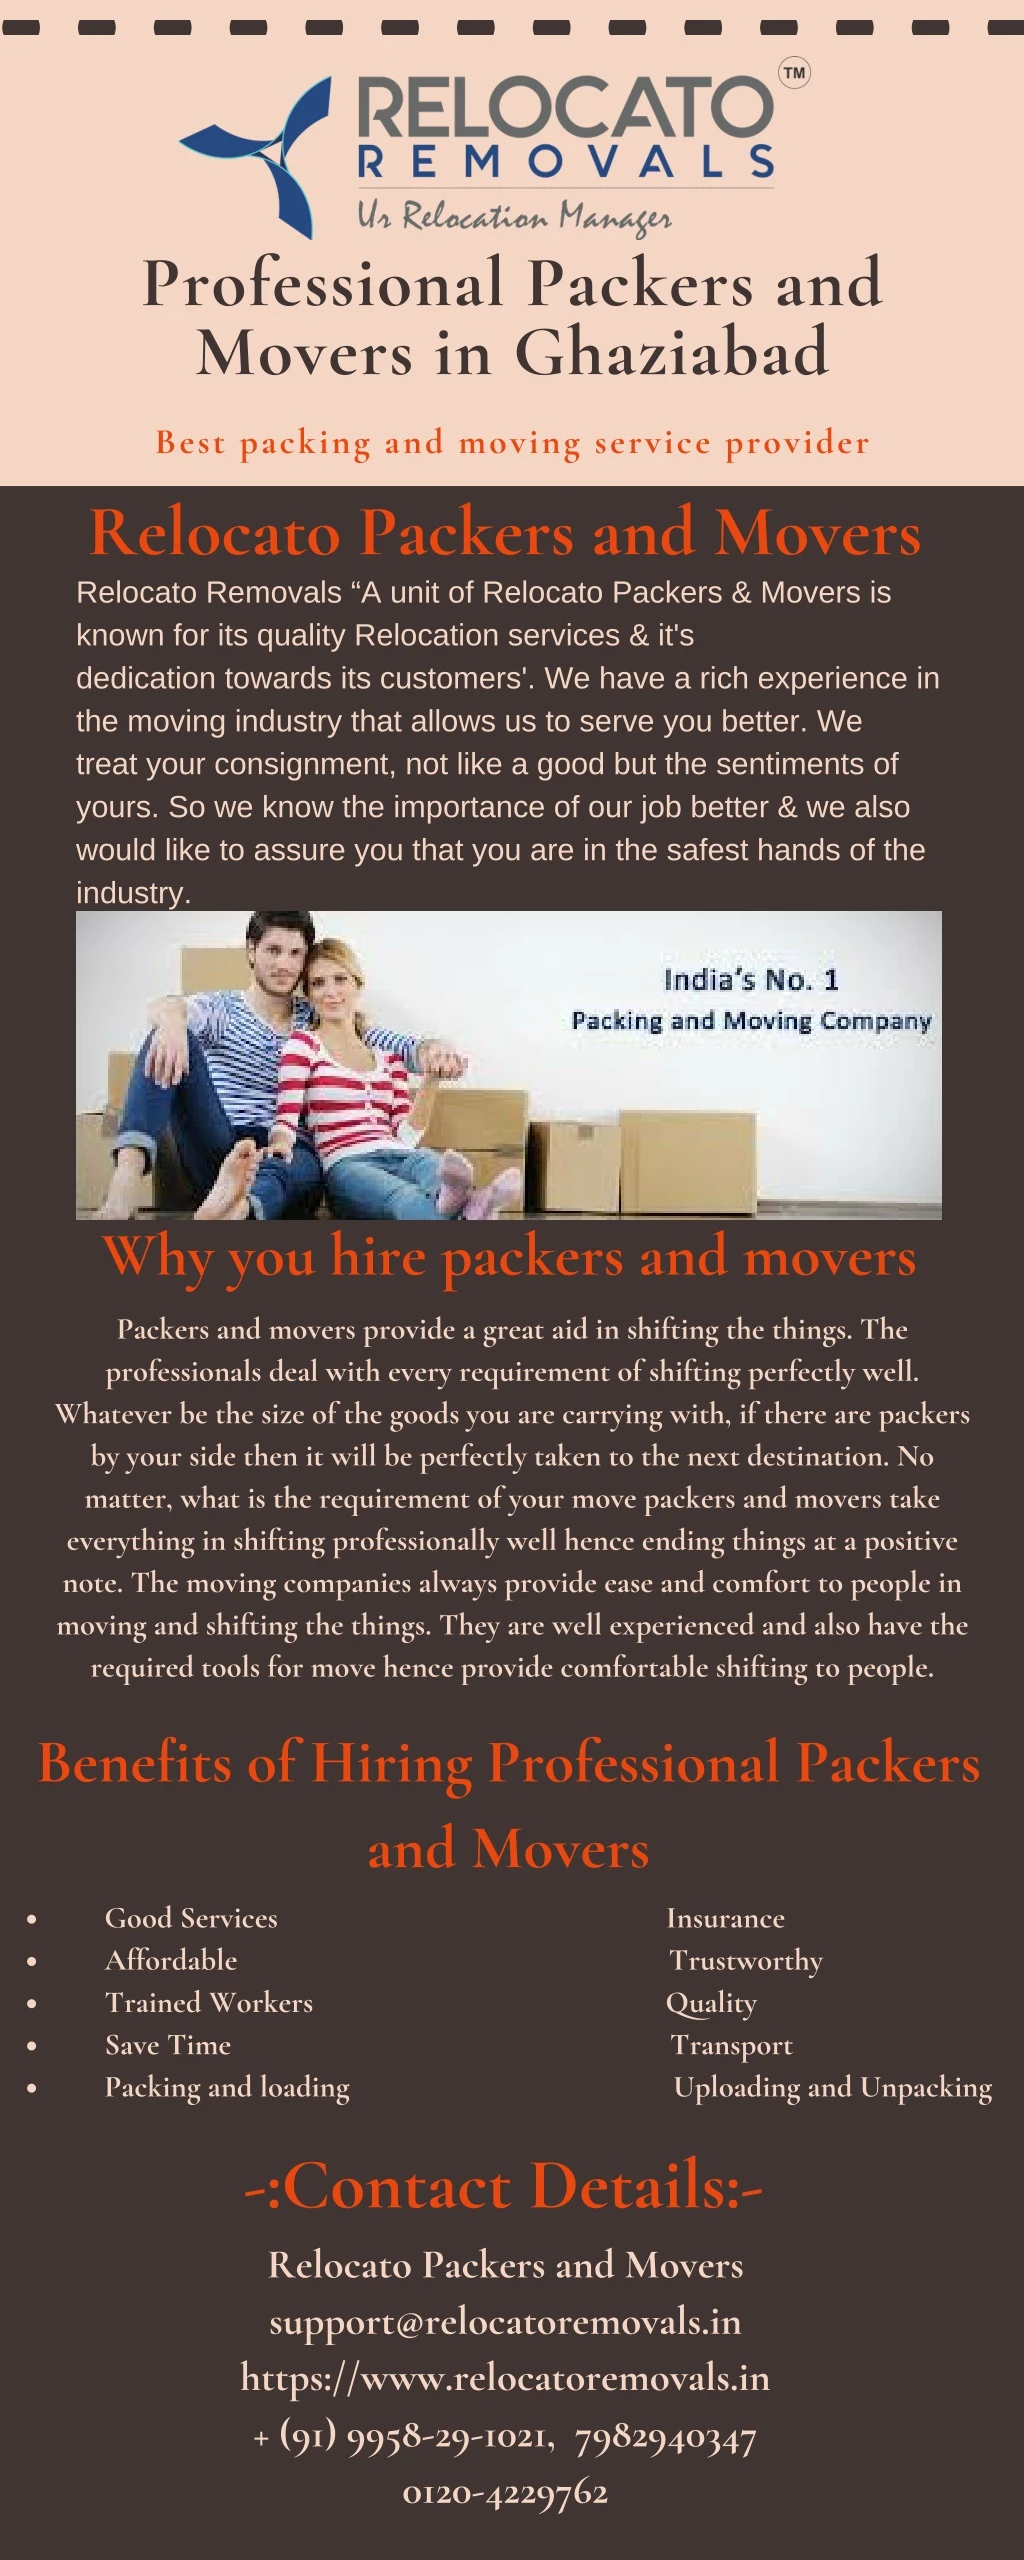 professional packers and movers in ghaziabad